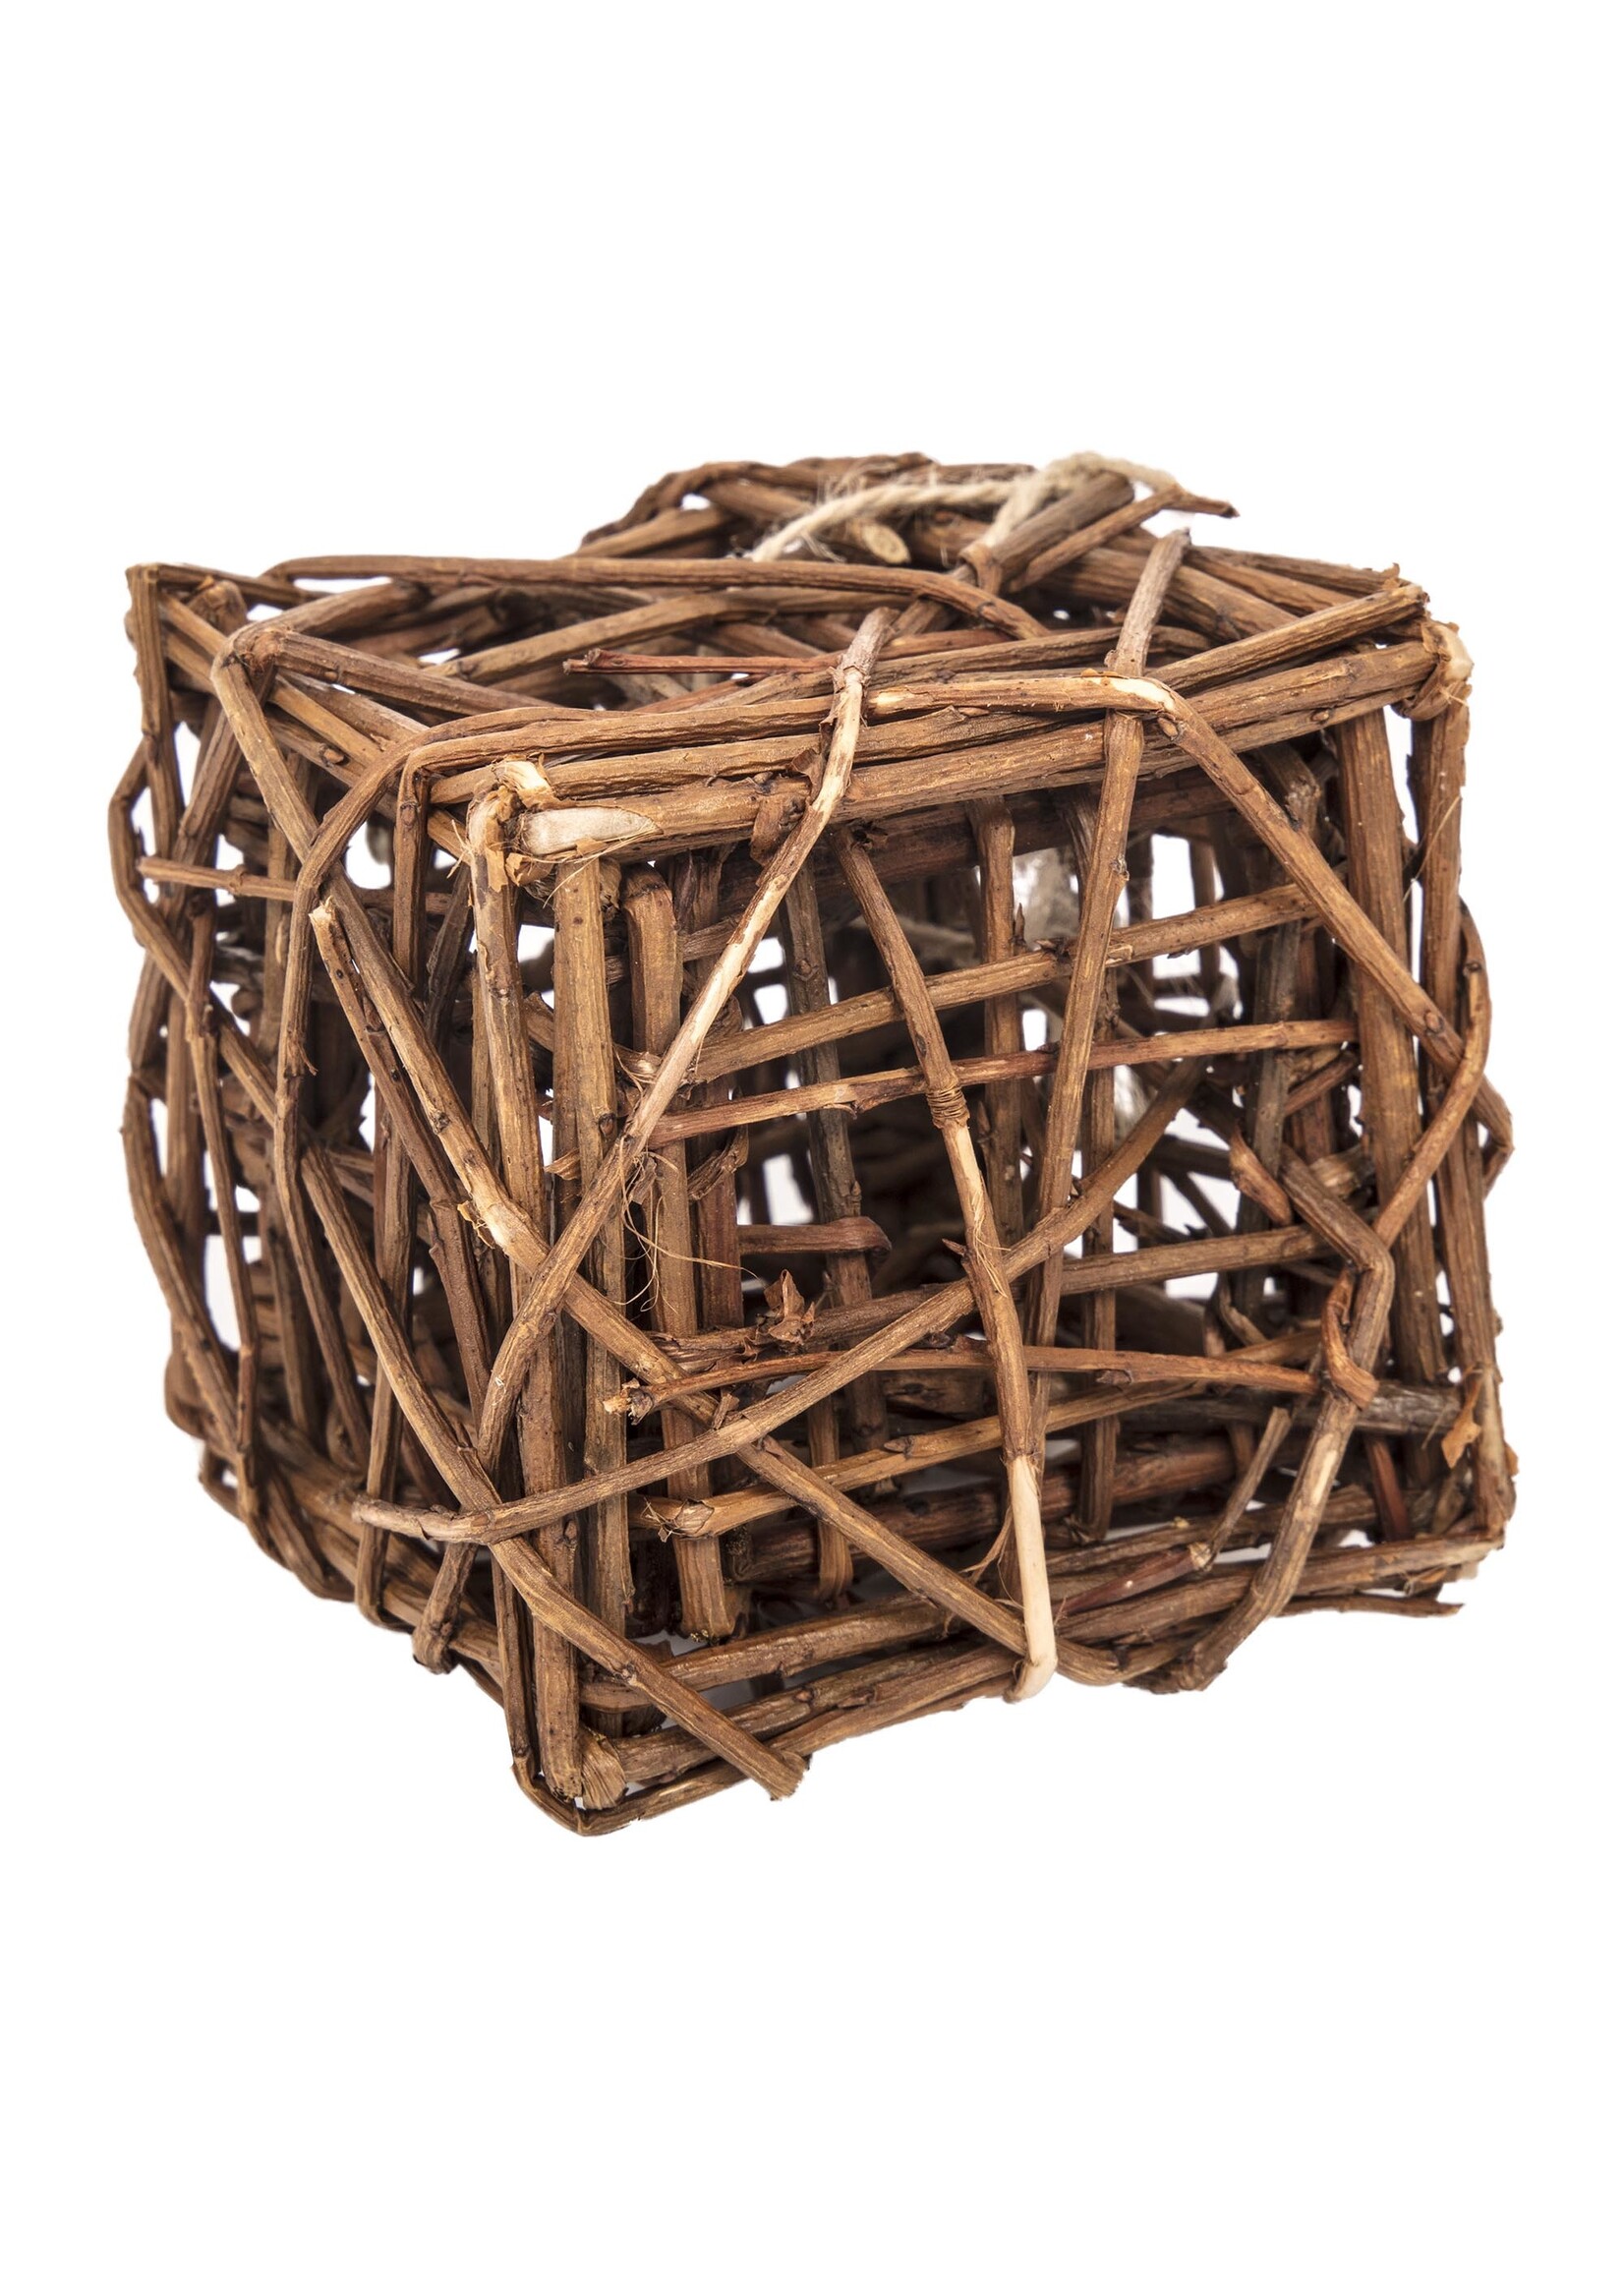 Ware Pet Products Ware Willow Gardens Chew Cube 4 x 4 x 7in